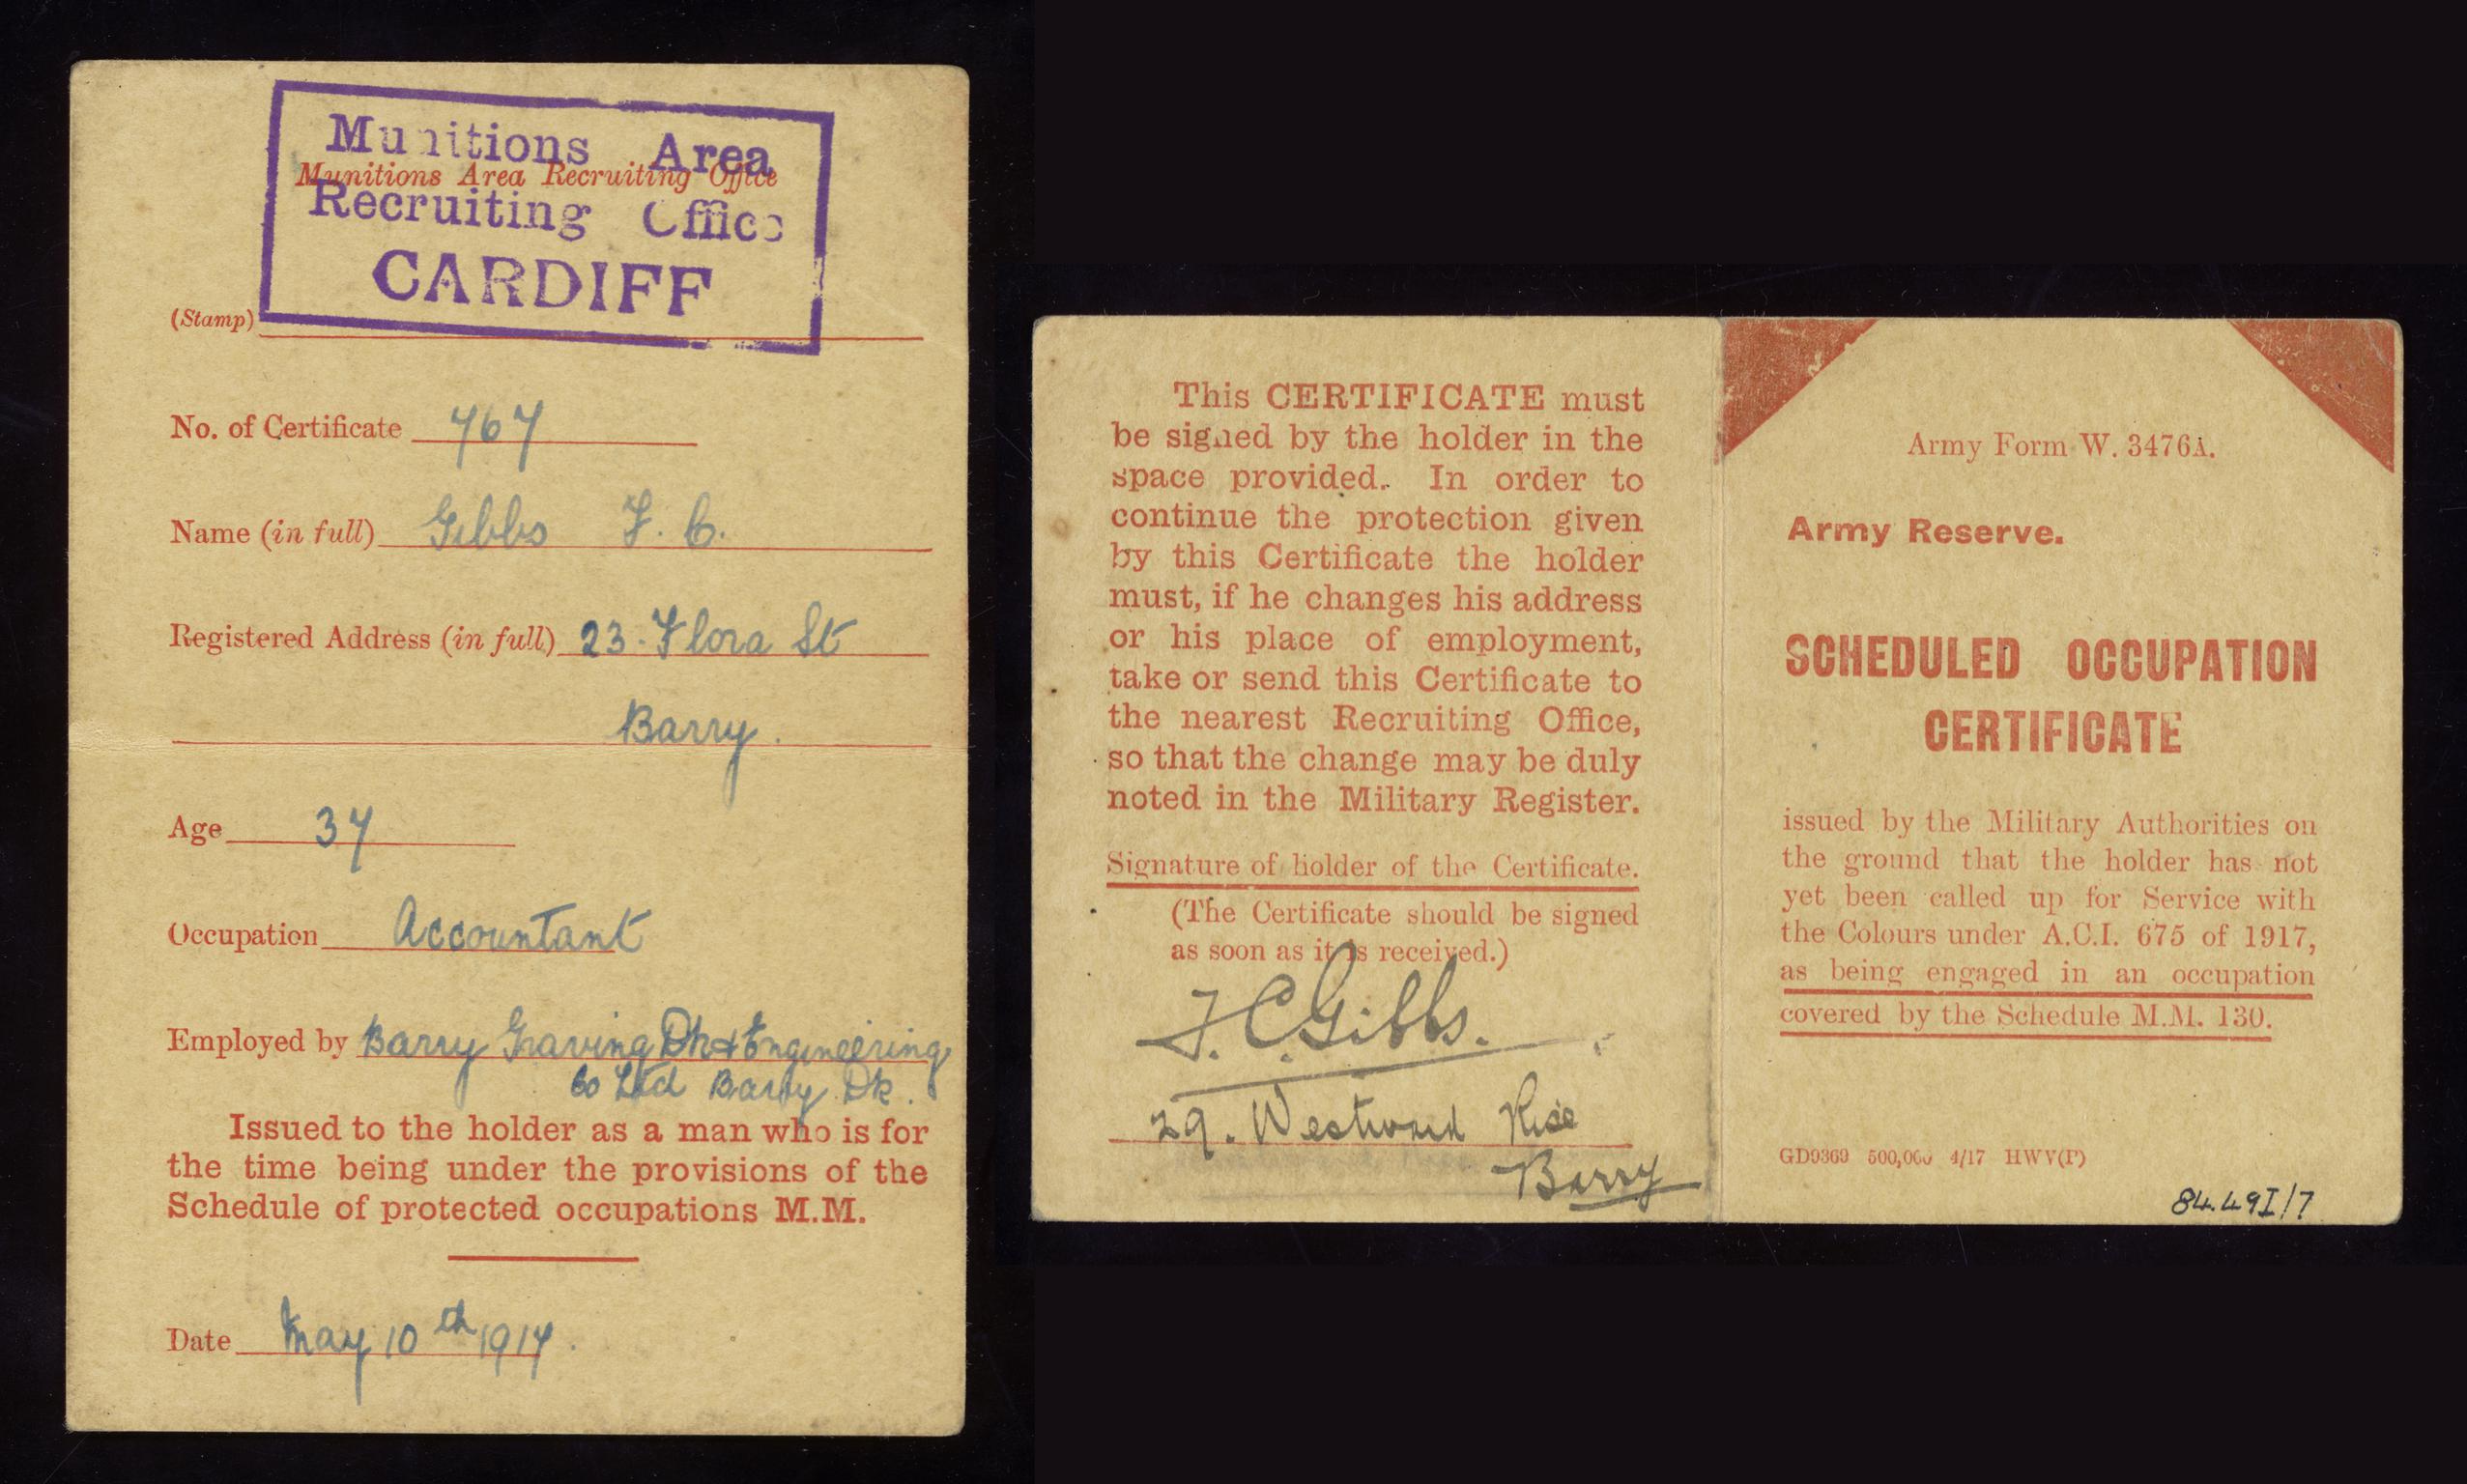 Transfer document to the army reserve